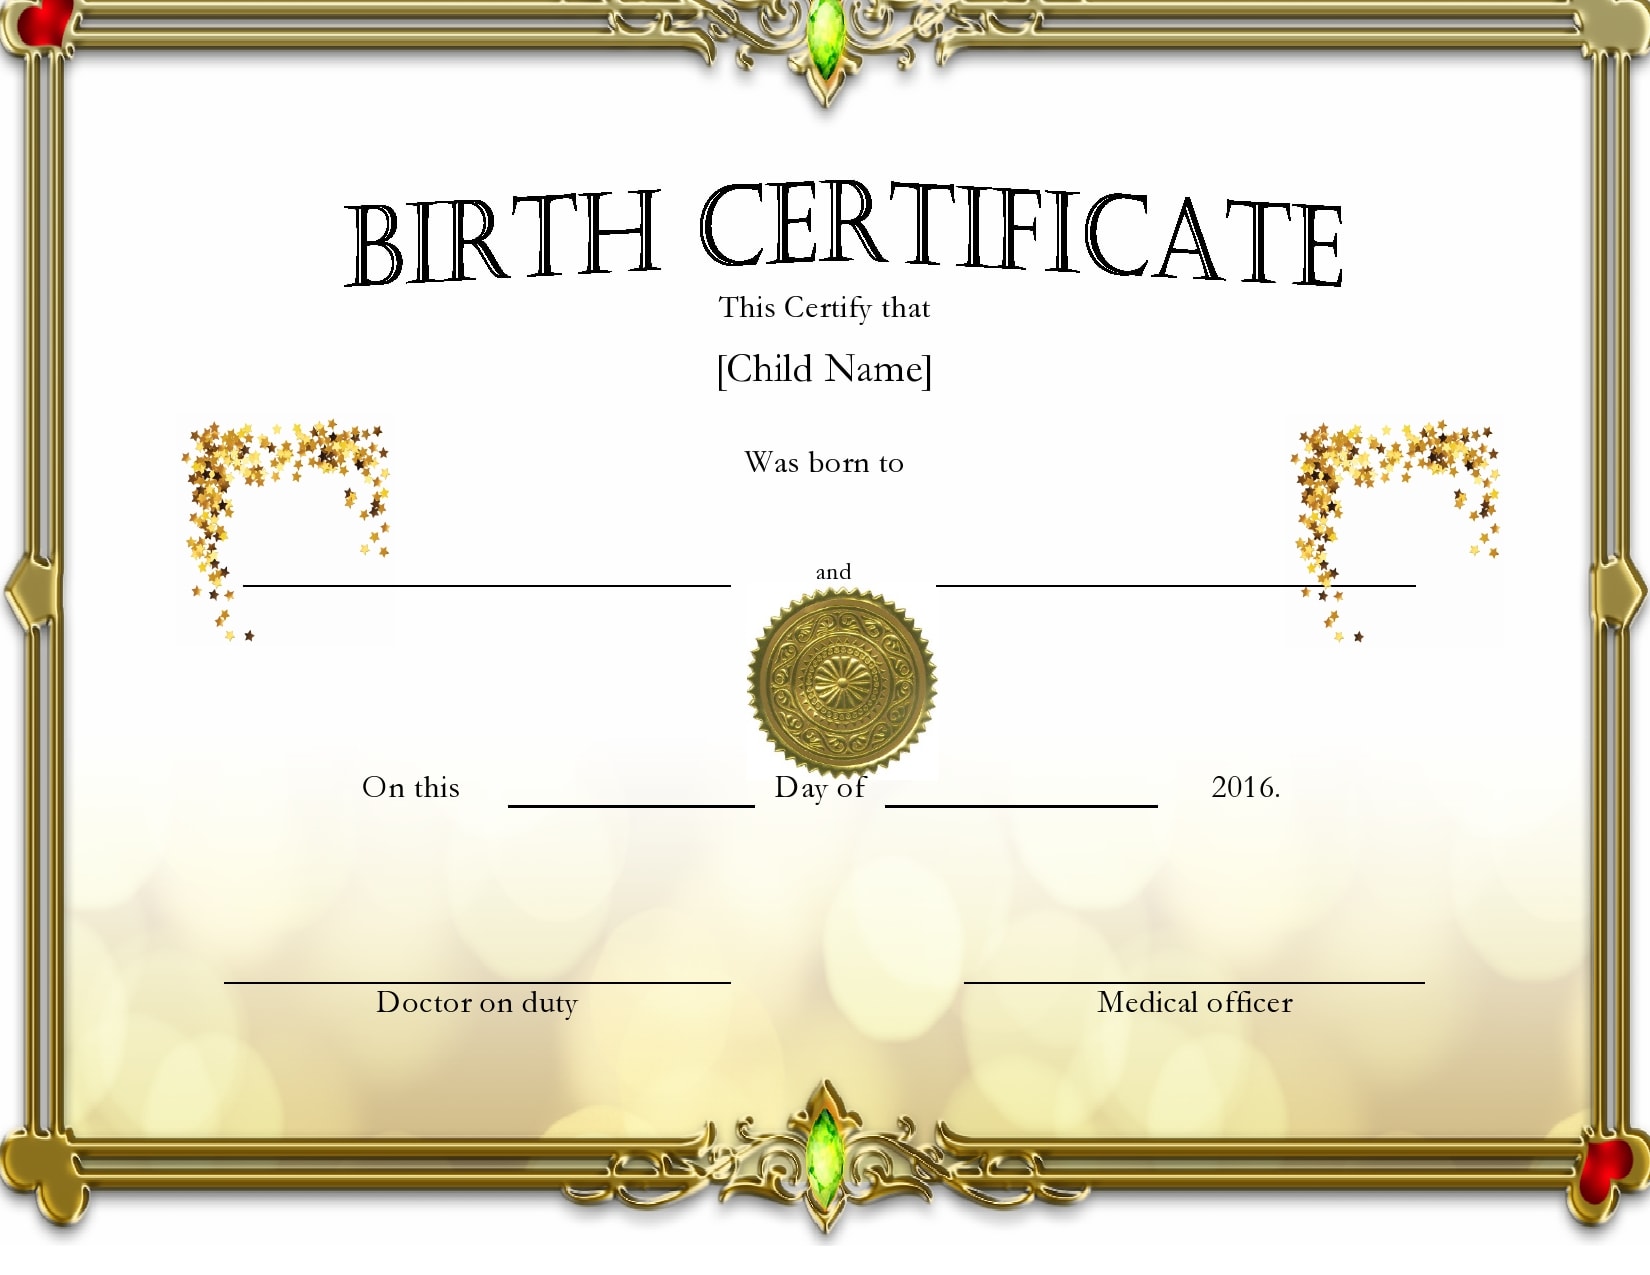 22 Blank Birth Certificate Templates (& Examples) - PrintableTemplates Inside Novelty Birth Certificate Template